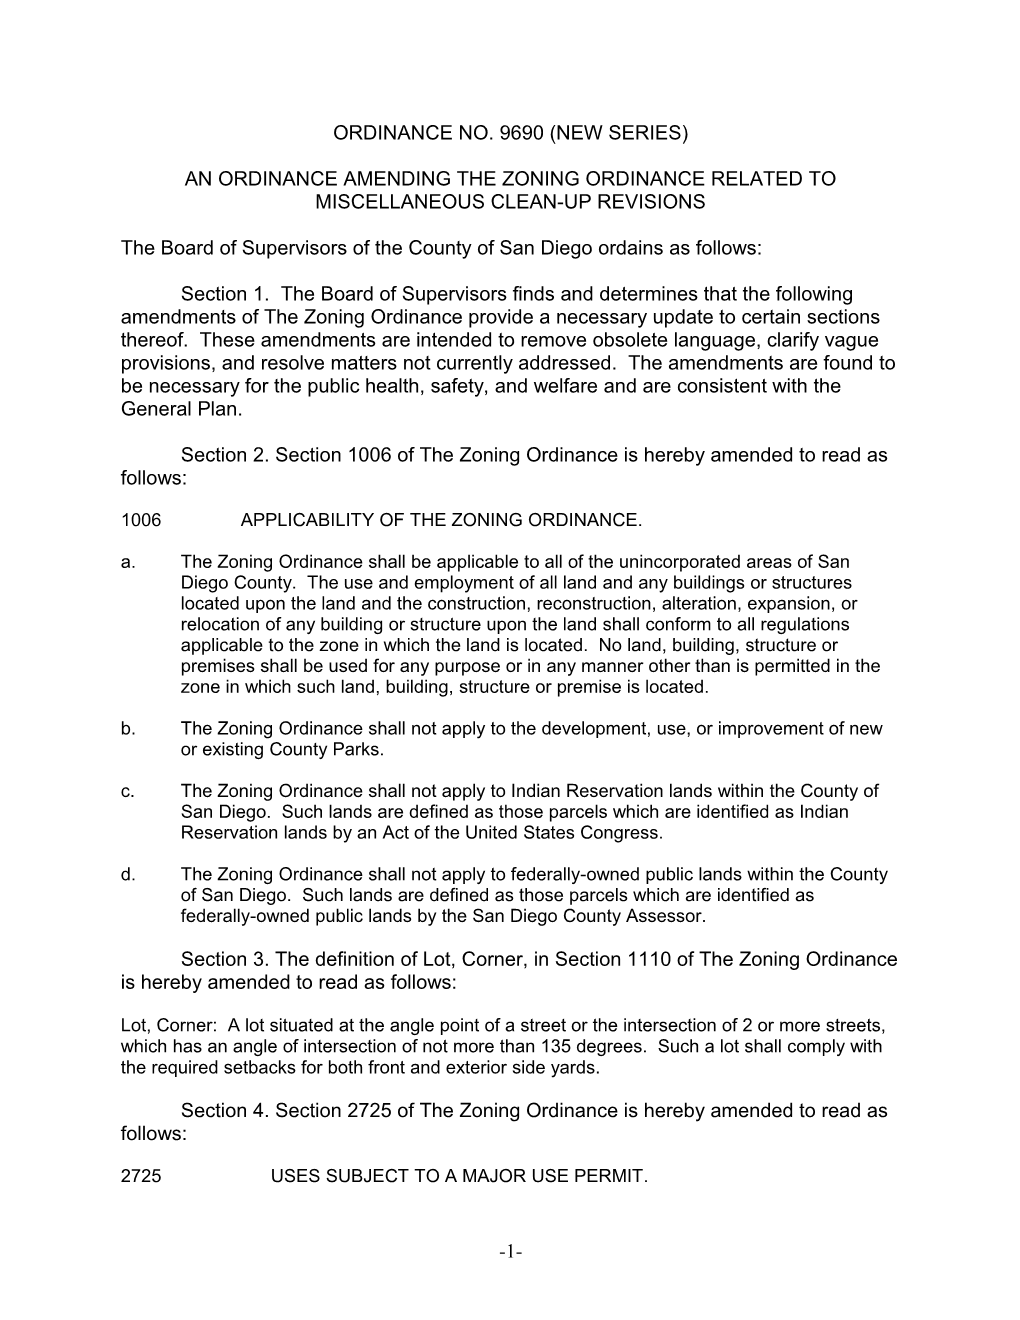 An Ordinance Amending the Zoning Ordinance Related to Miscellaneous Clean-Up Revisions